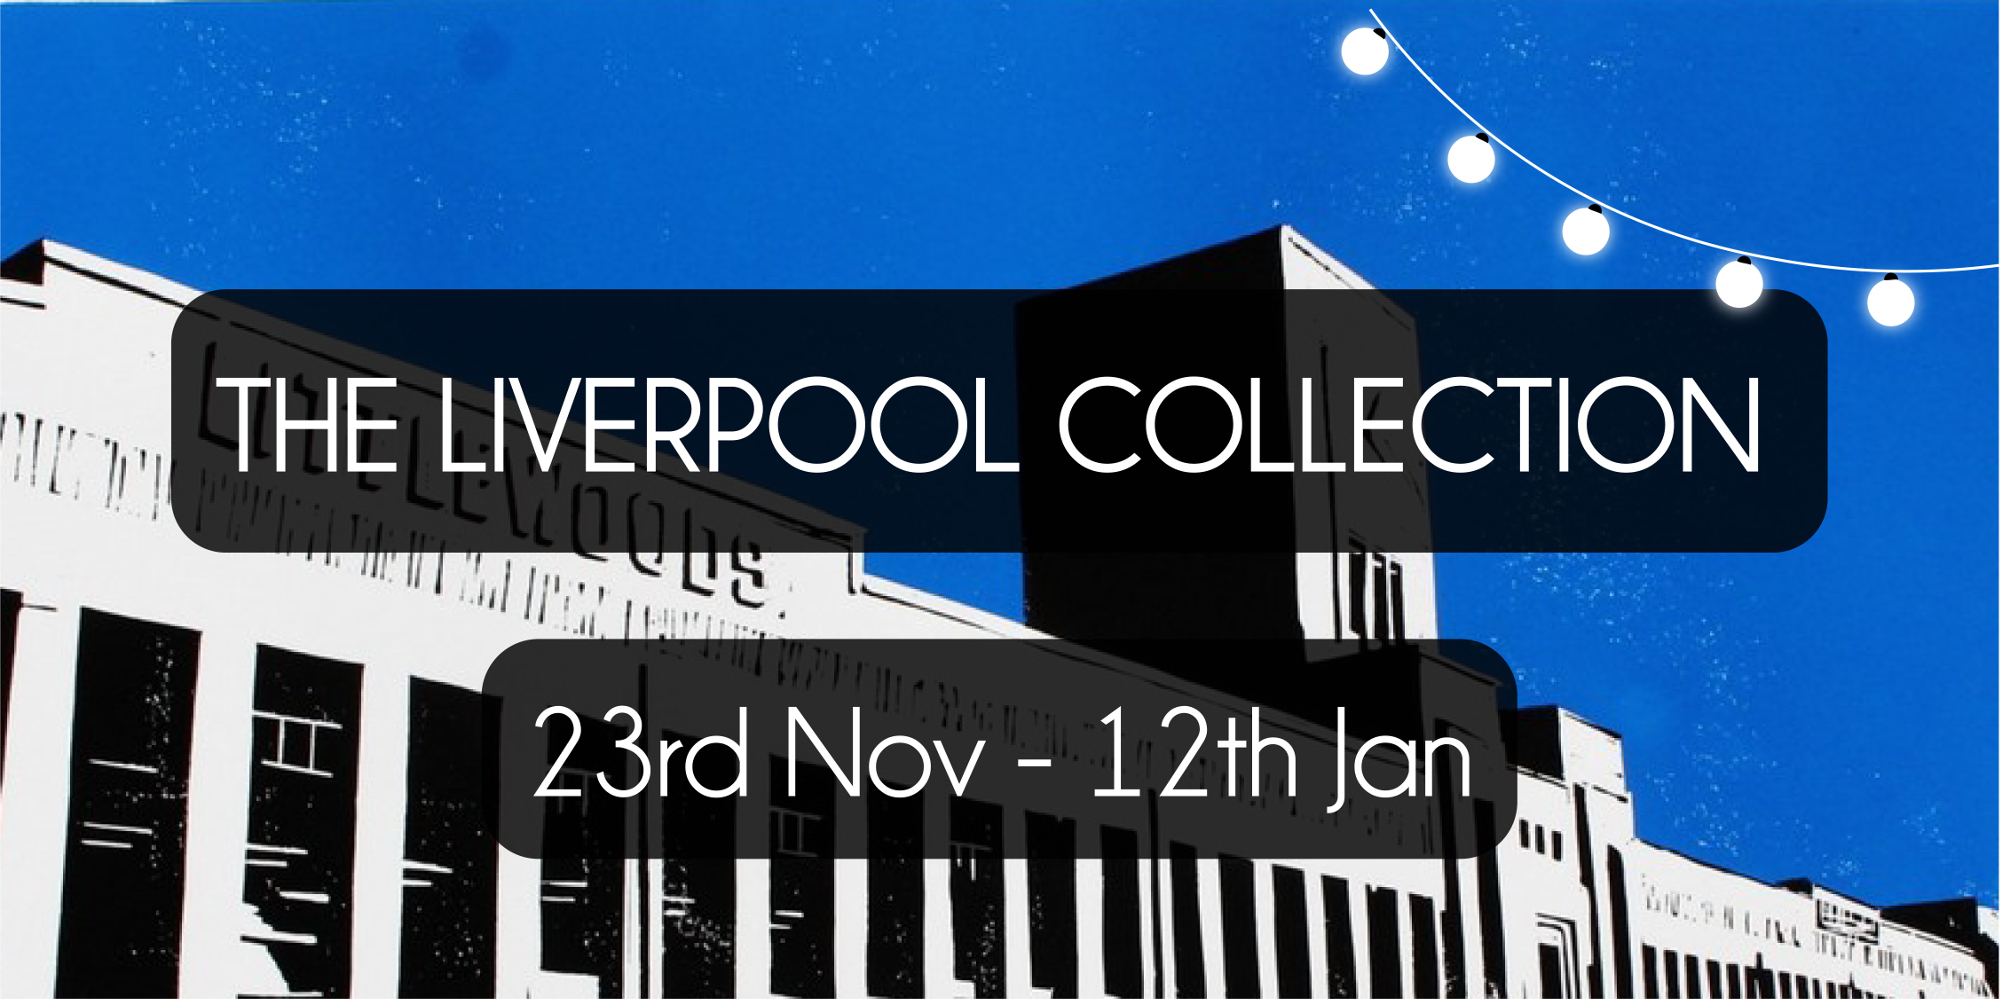 The Liverpool Collection Exhibition at dot-art Gallery